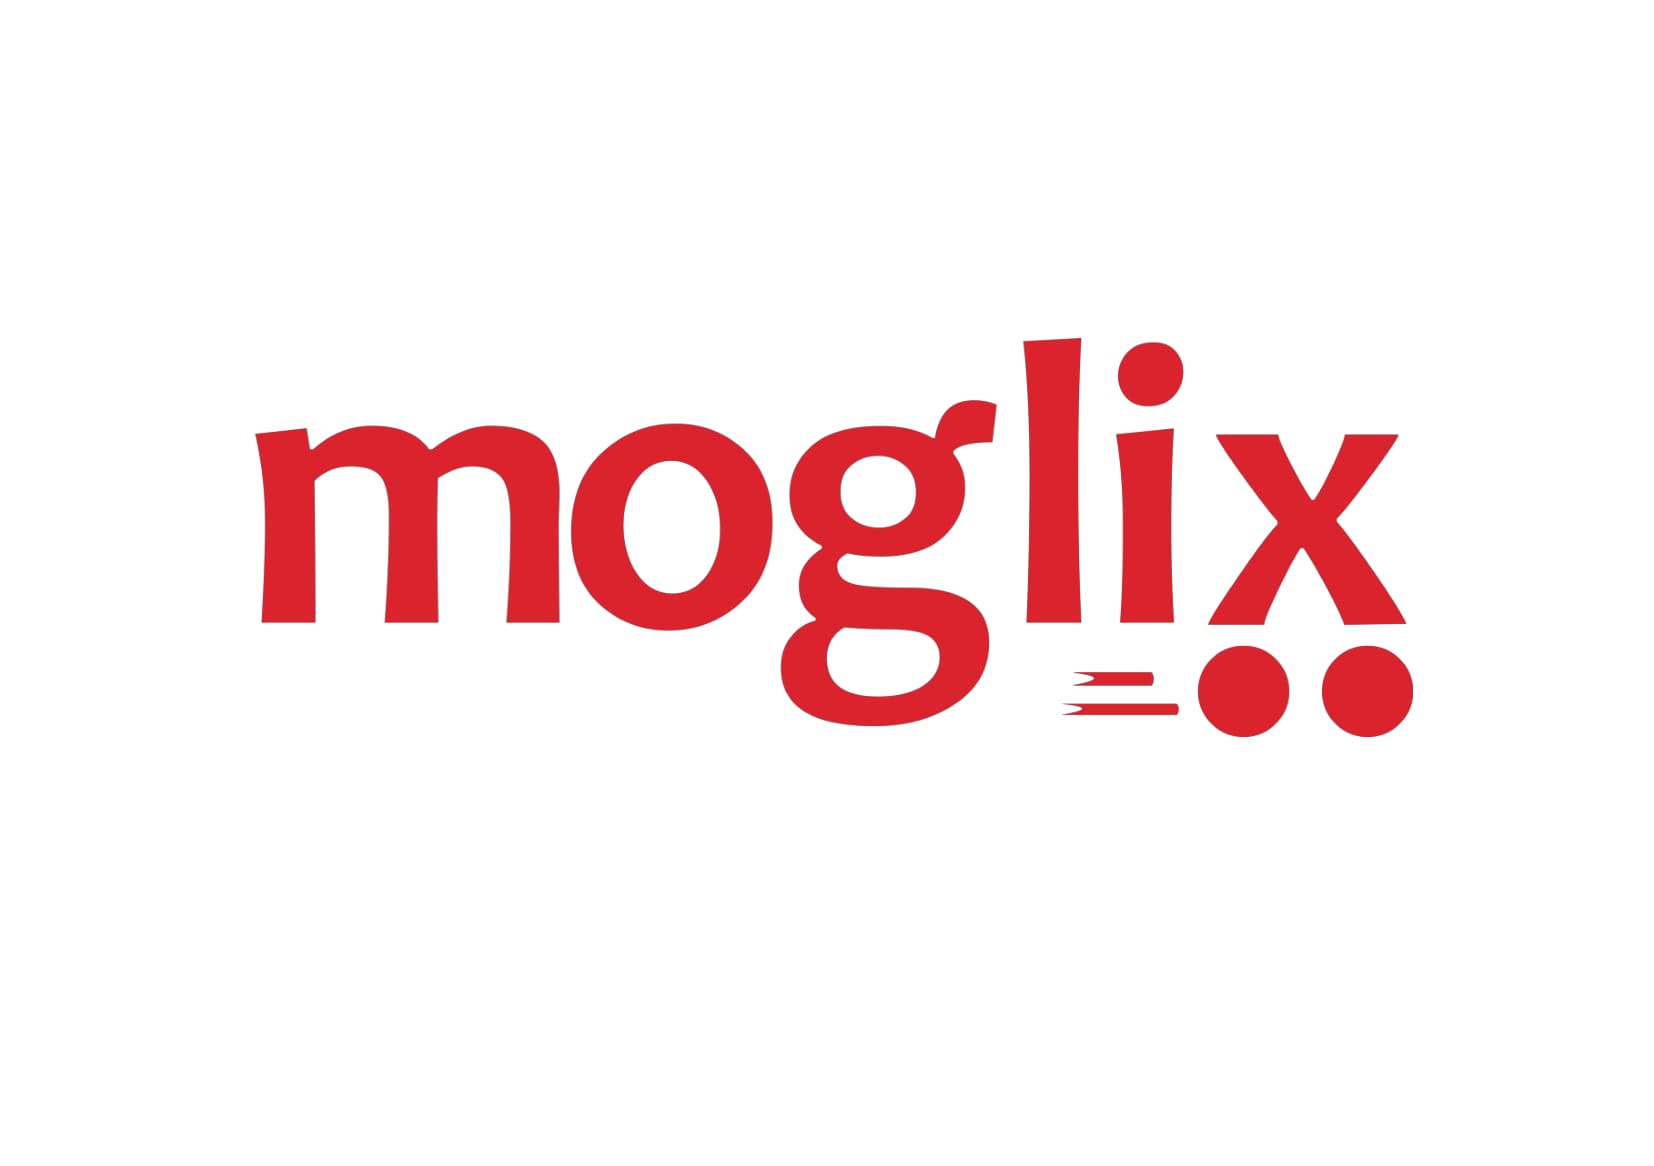 Moglix.com, is an Indian B2B e-commerce marketplace that specializes in B2B procurement of industrial products such as MRO, Fasteners, Electrical, Hardware, Pneumatics, Safety items and more. Its aim is to be the largest technology platform where demand and supply can be matched through price discovery and product availability. Moglix was founded in August 2015 by Rahul Garg, who was previously the Head of Advertising Exchange at Google Asia. Moglix is led by a group of young and motivated individuals passionate about shaping the manufacturing/ B2B commerce landscape in India.